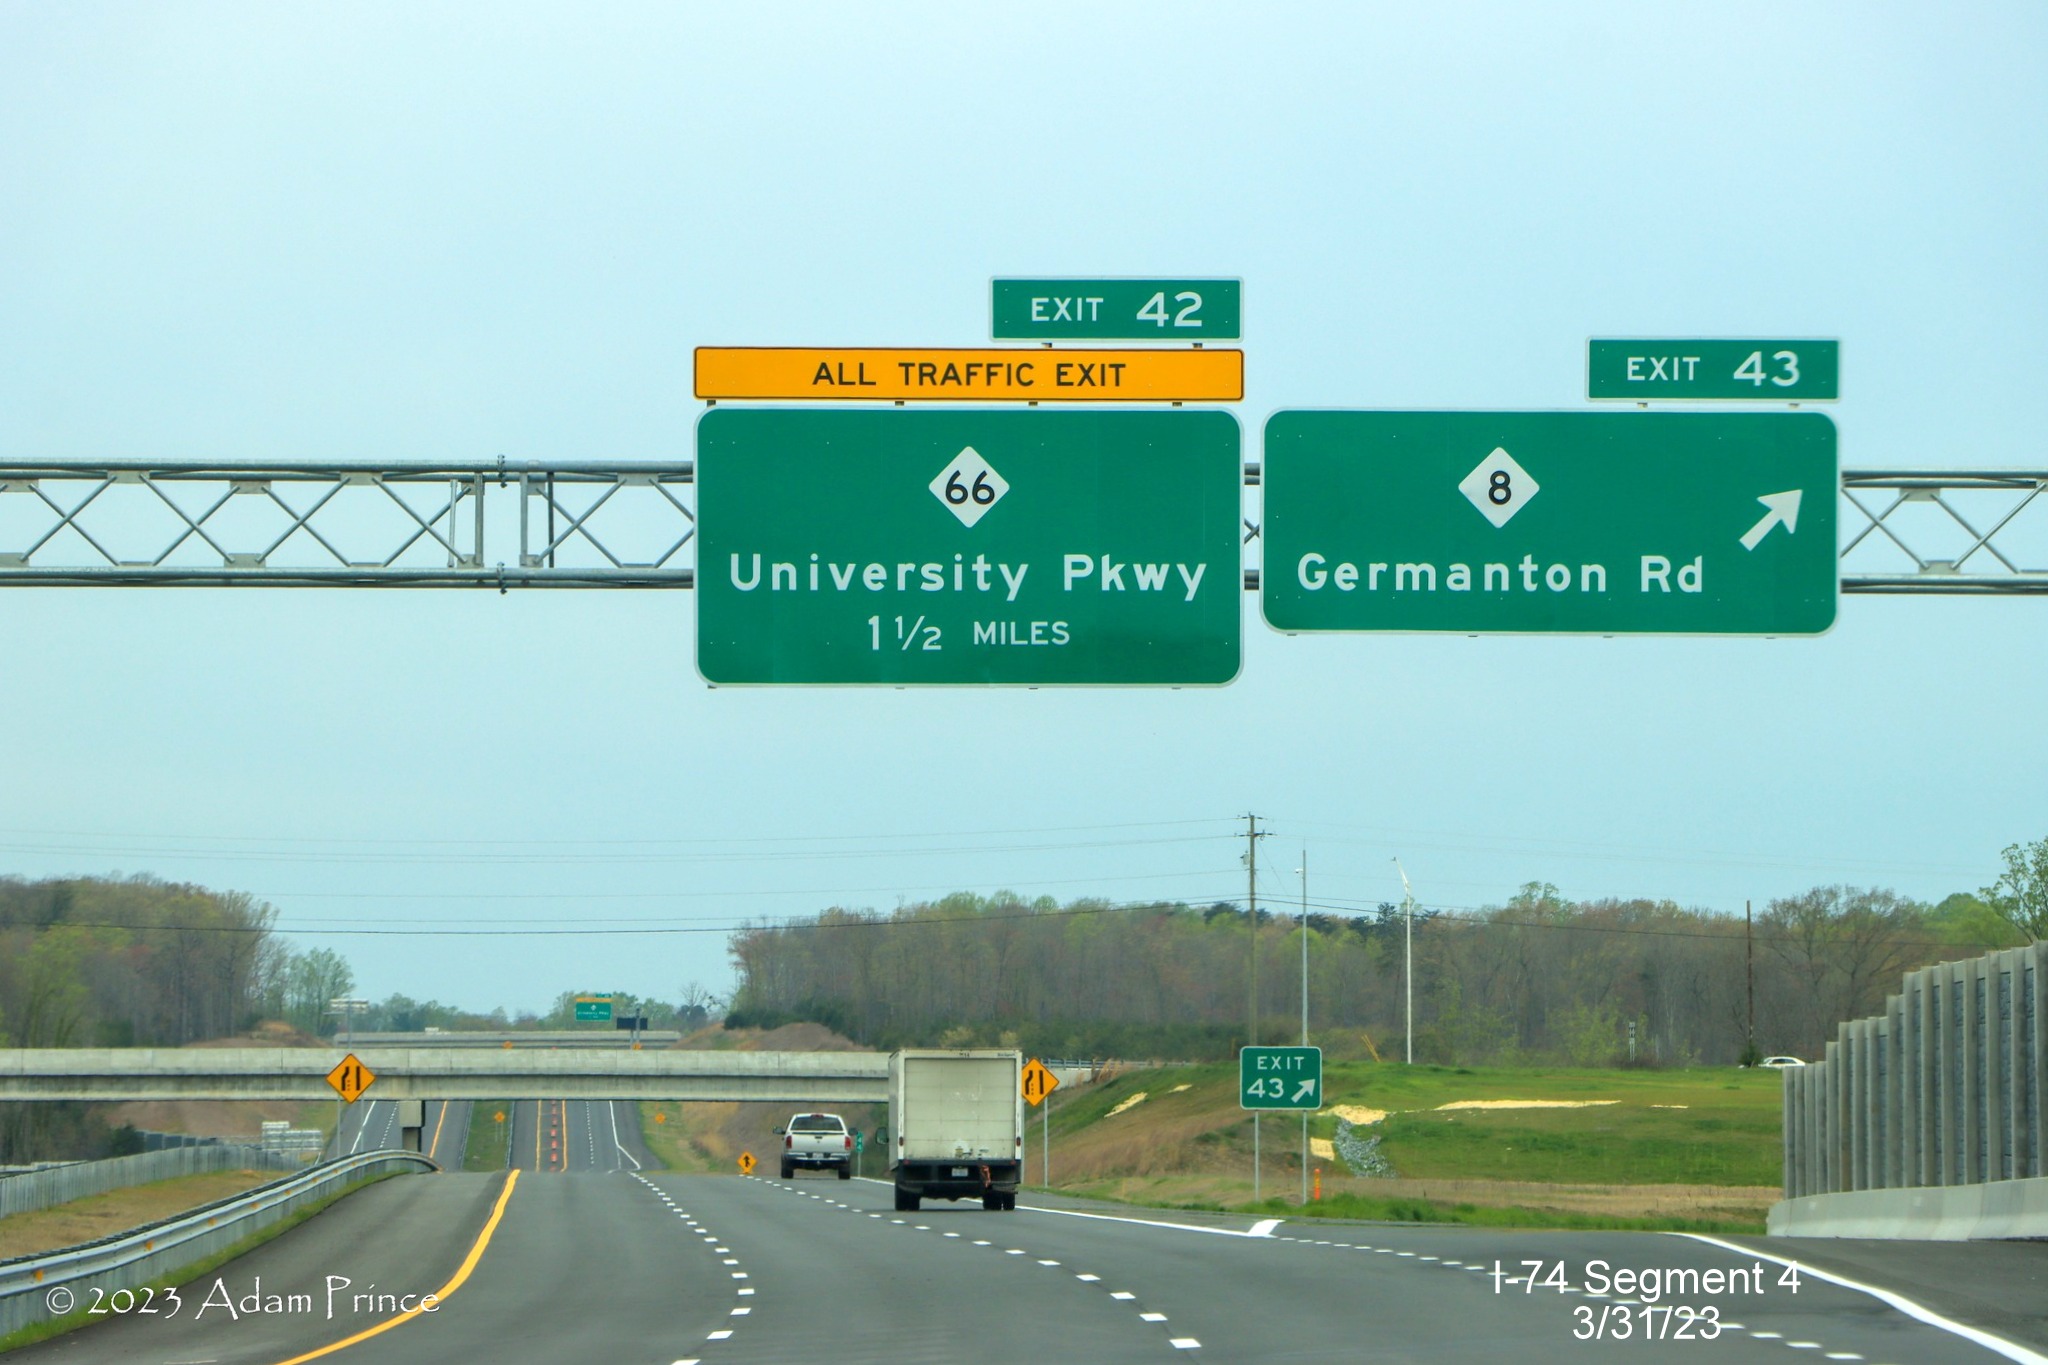 Image of overhead signage at exit for NC 8/Germanton Road on NC 74 (Future I-74) West/Winston-Salem 
        Northern Beltway, Adam Prince, March 2023